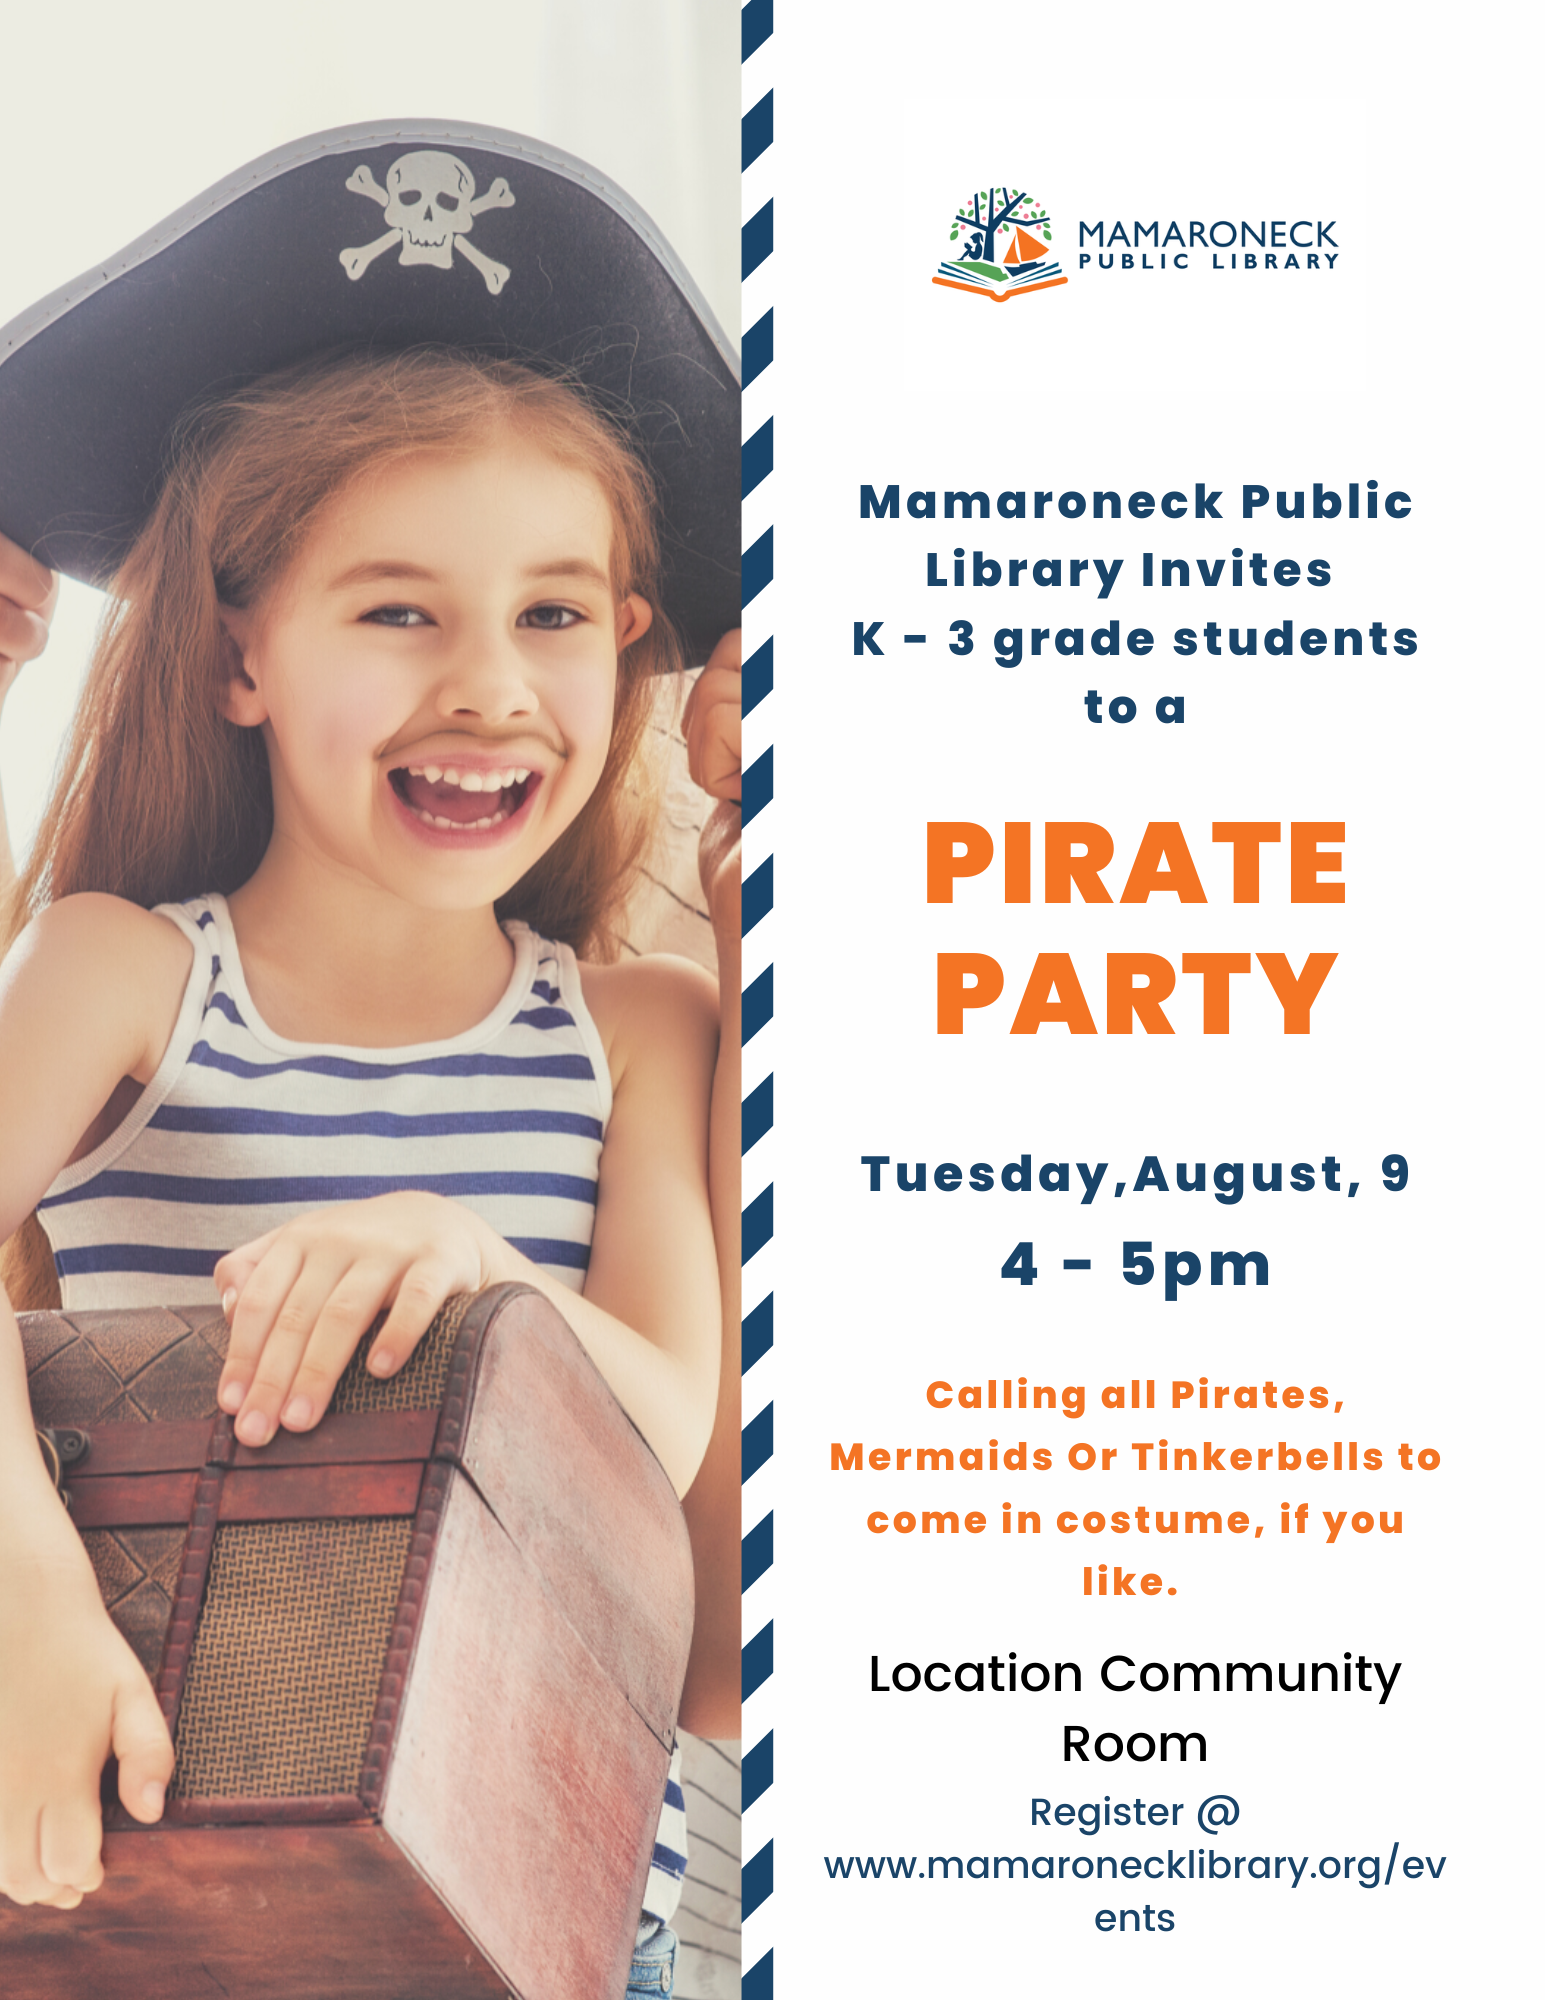 children's pirate party August 9th